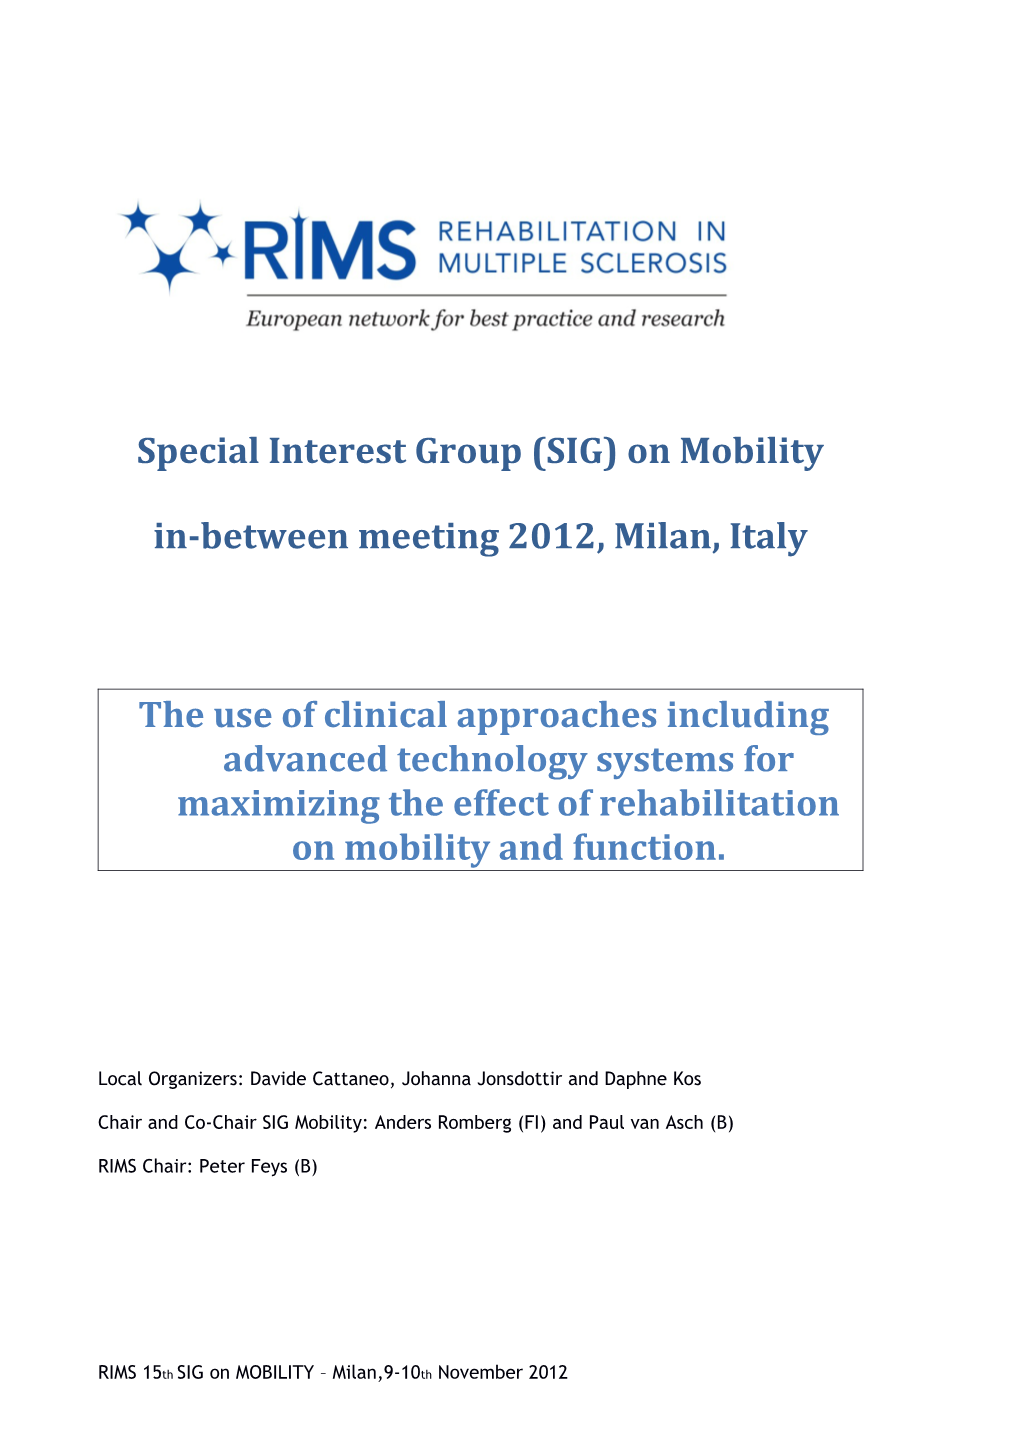 Special Interest Group (SIG) on Mobility